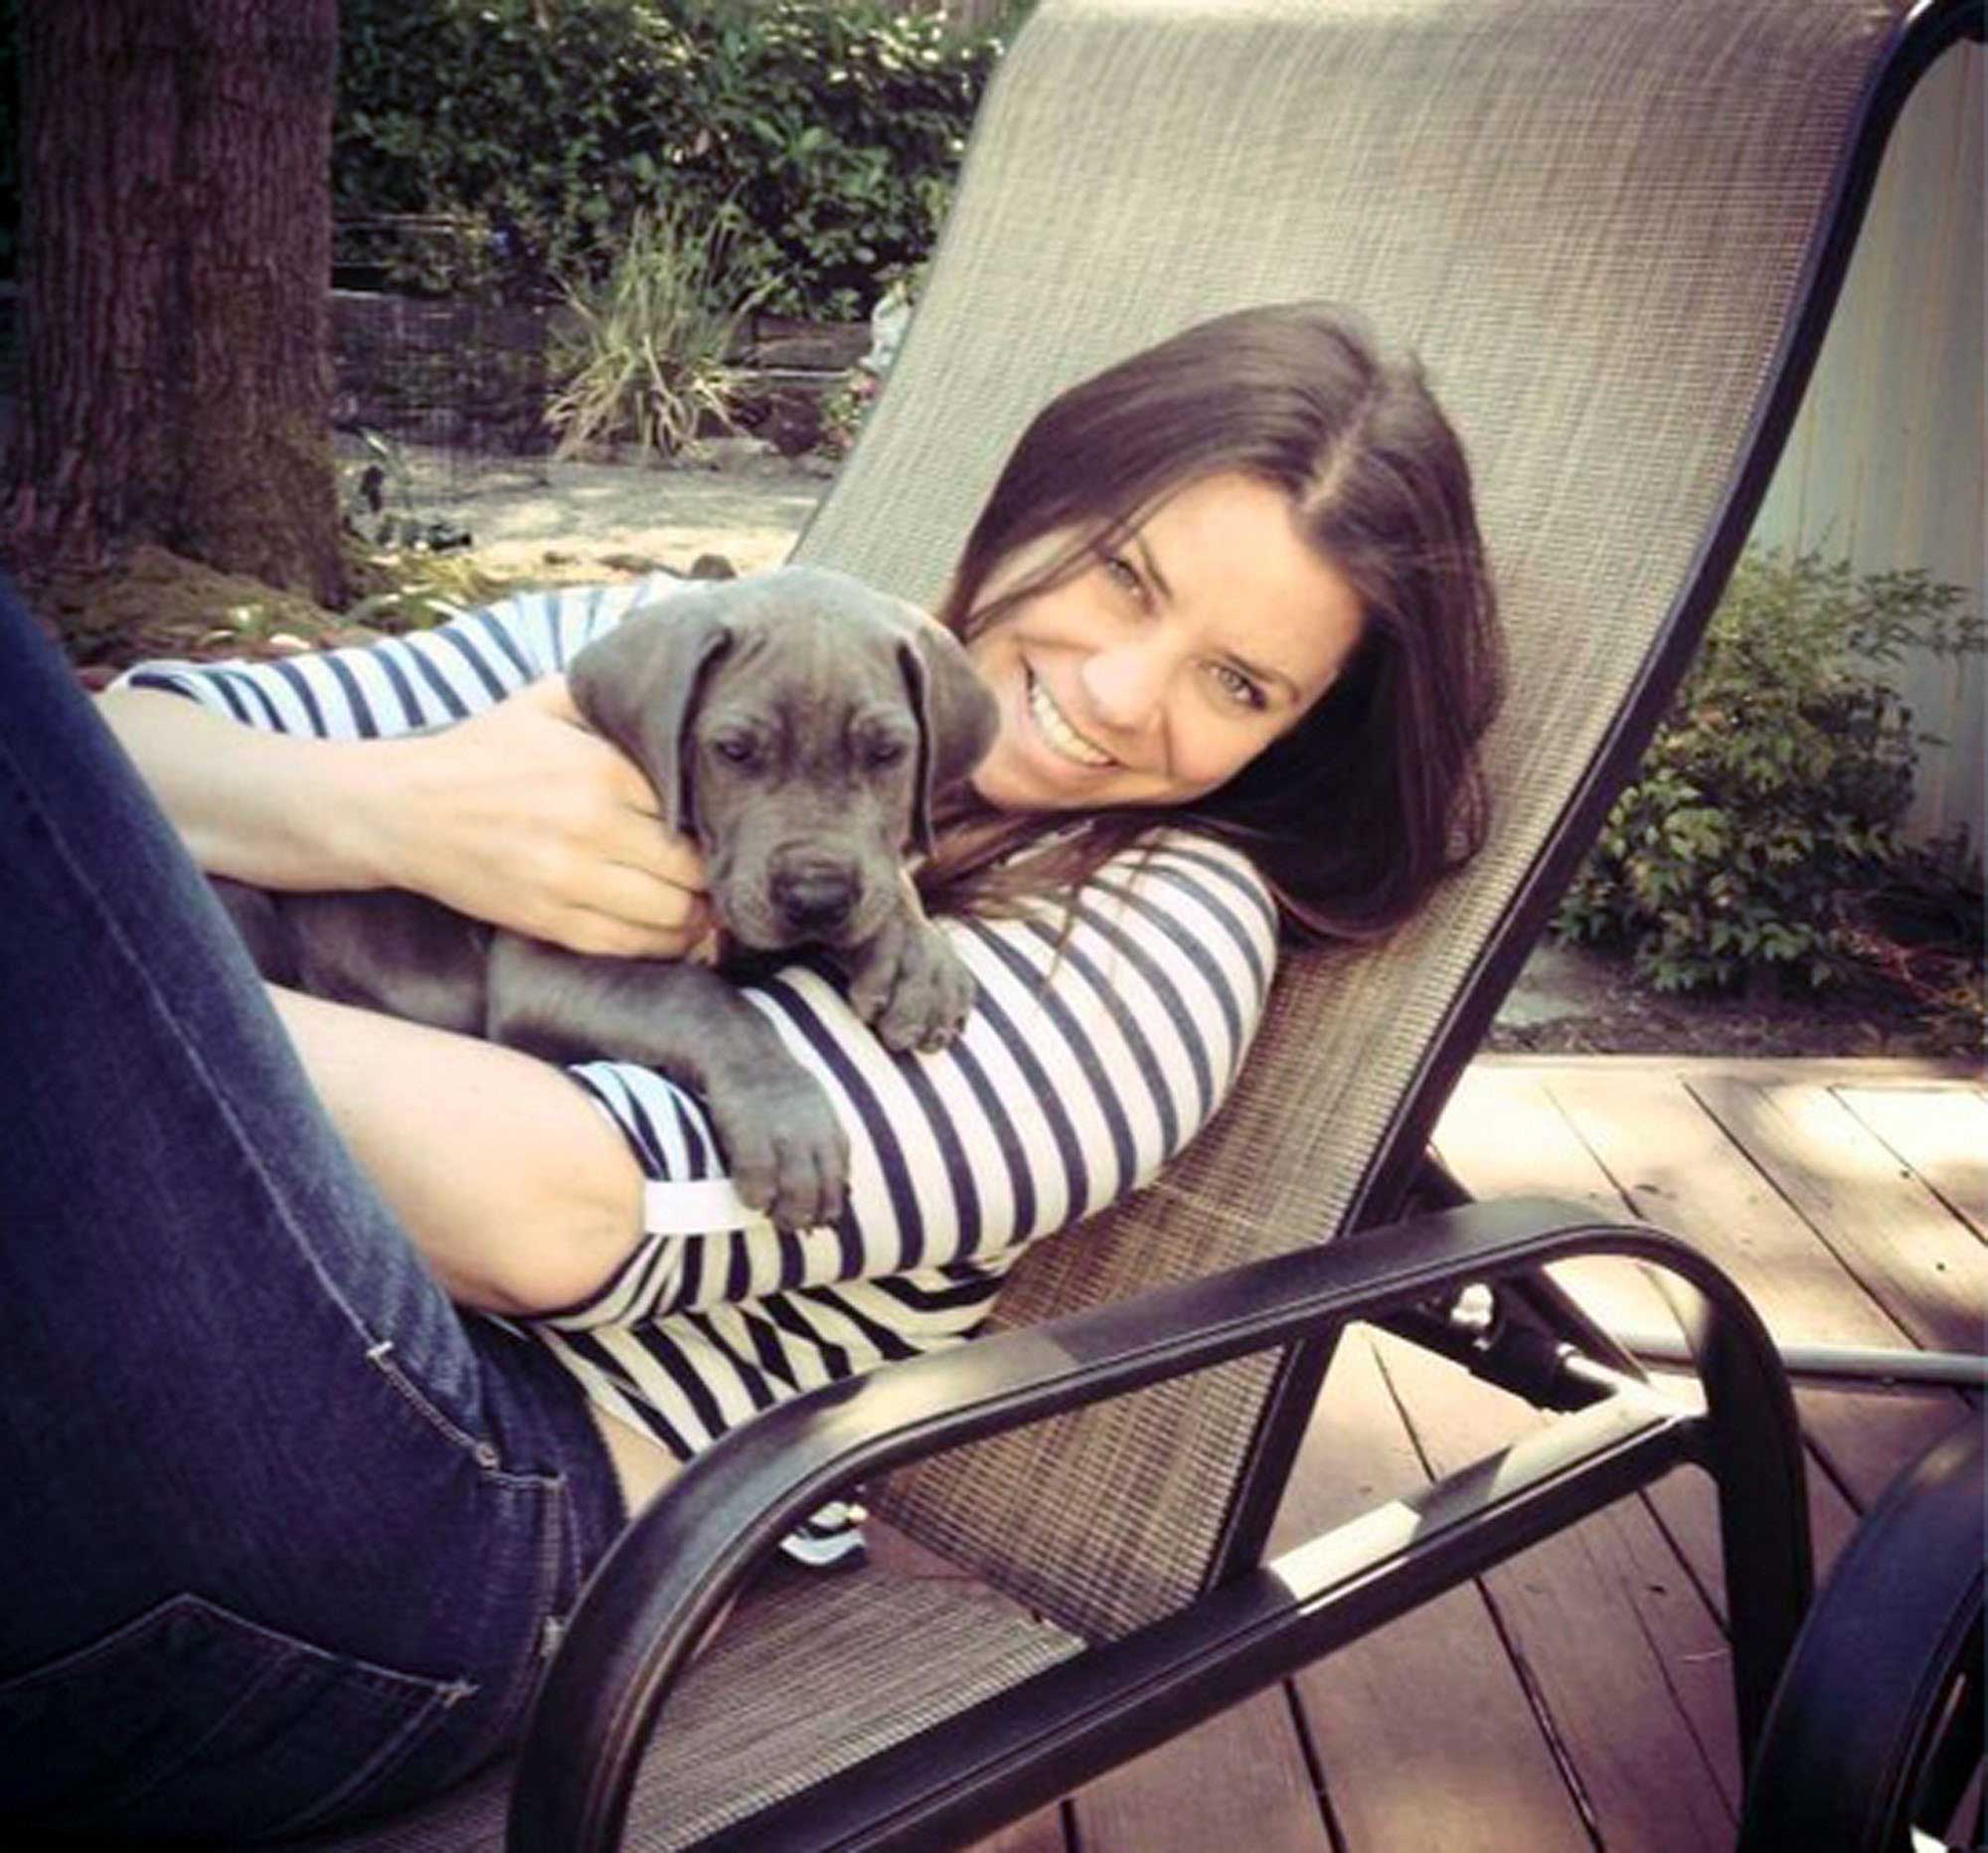 This undated file photo provided by the Maynard family shows Brittany Maynard, a 29-year-old terminally ill woman who plans to take her own life under Oregon’s death with dignity law. (AP)